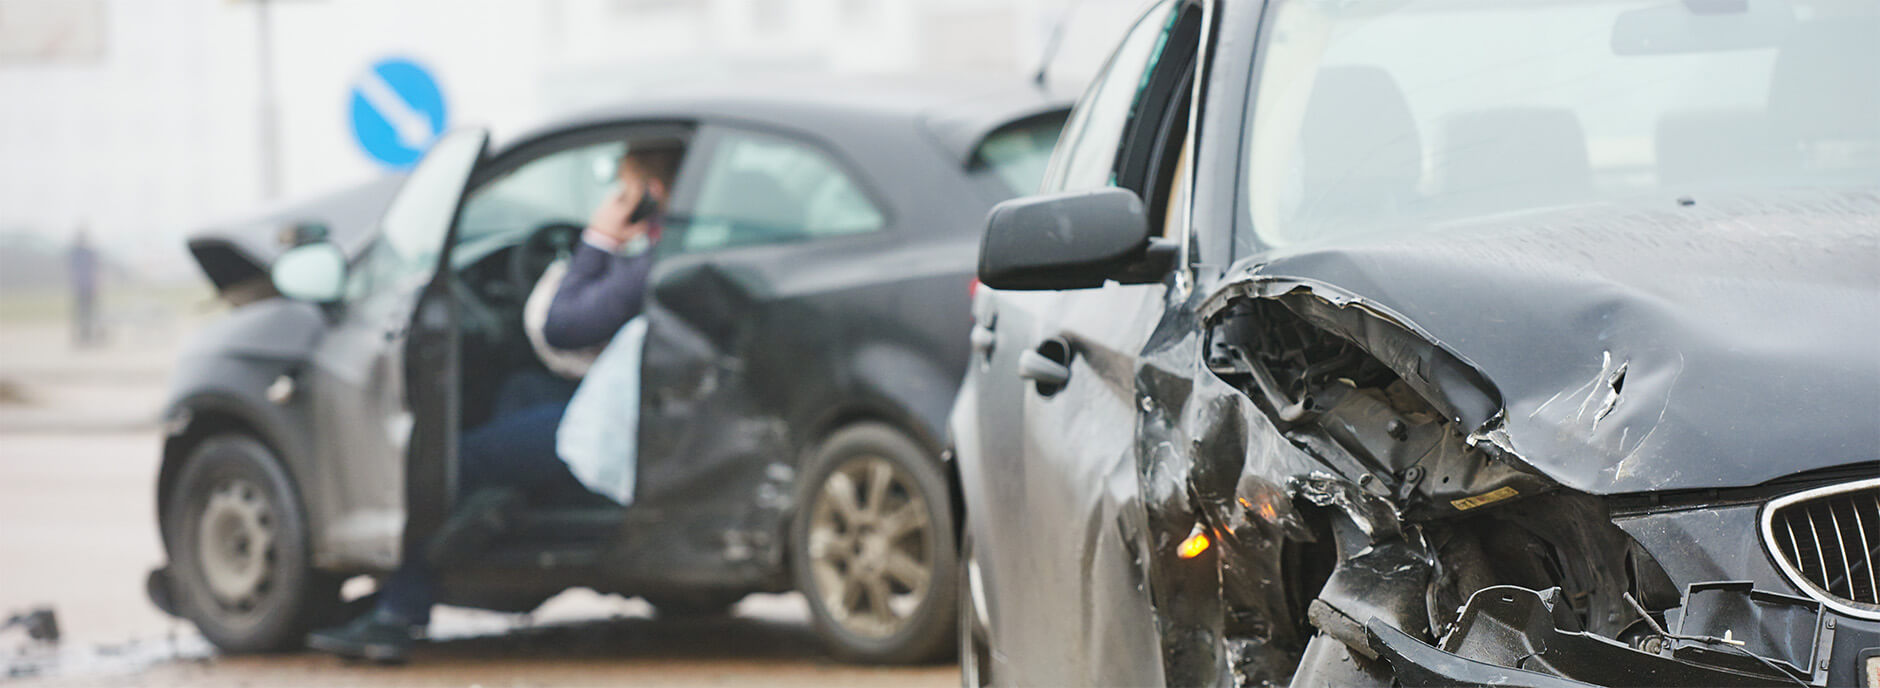 Spring Valley Personal Injury Lawyer